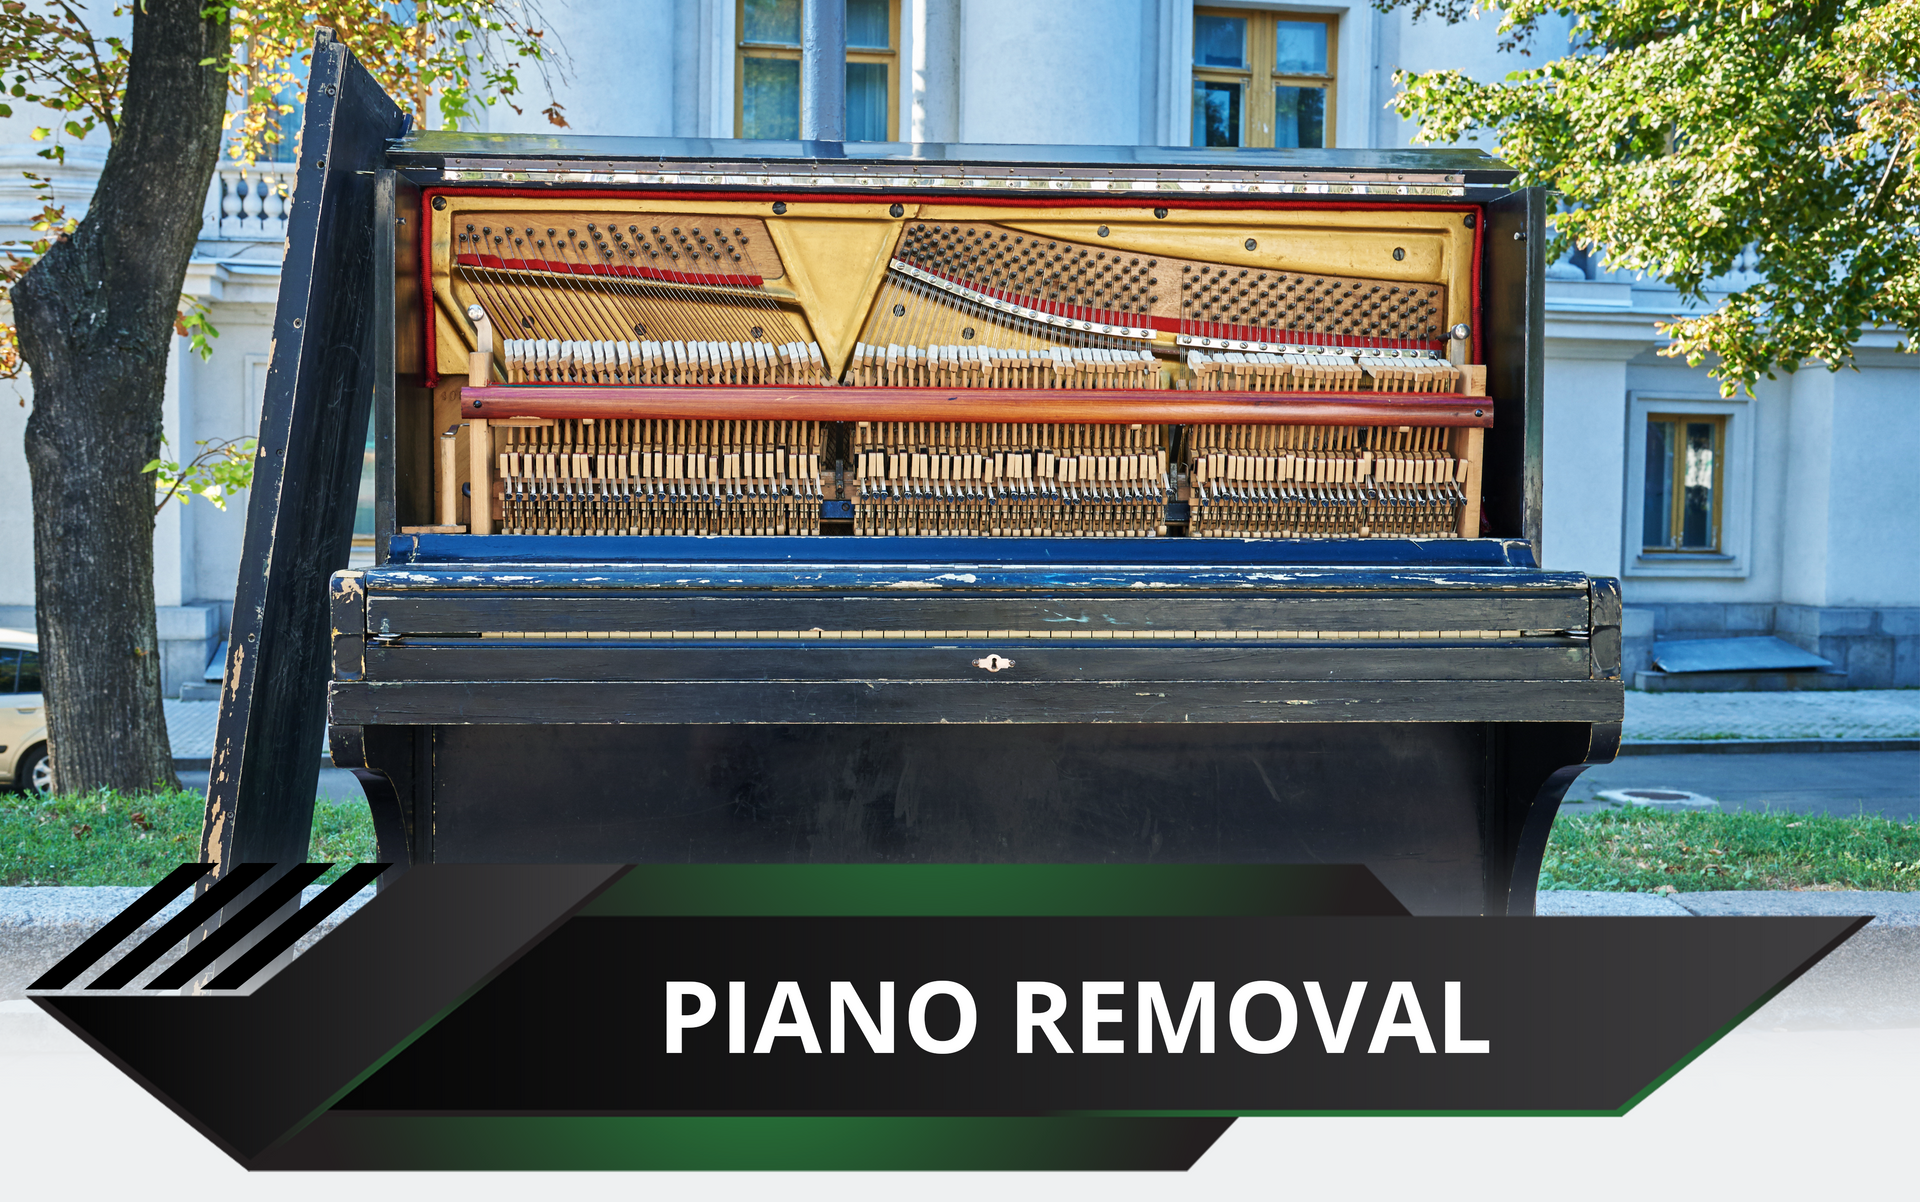 Piano Removal in Sanger, CA